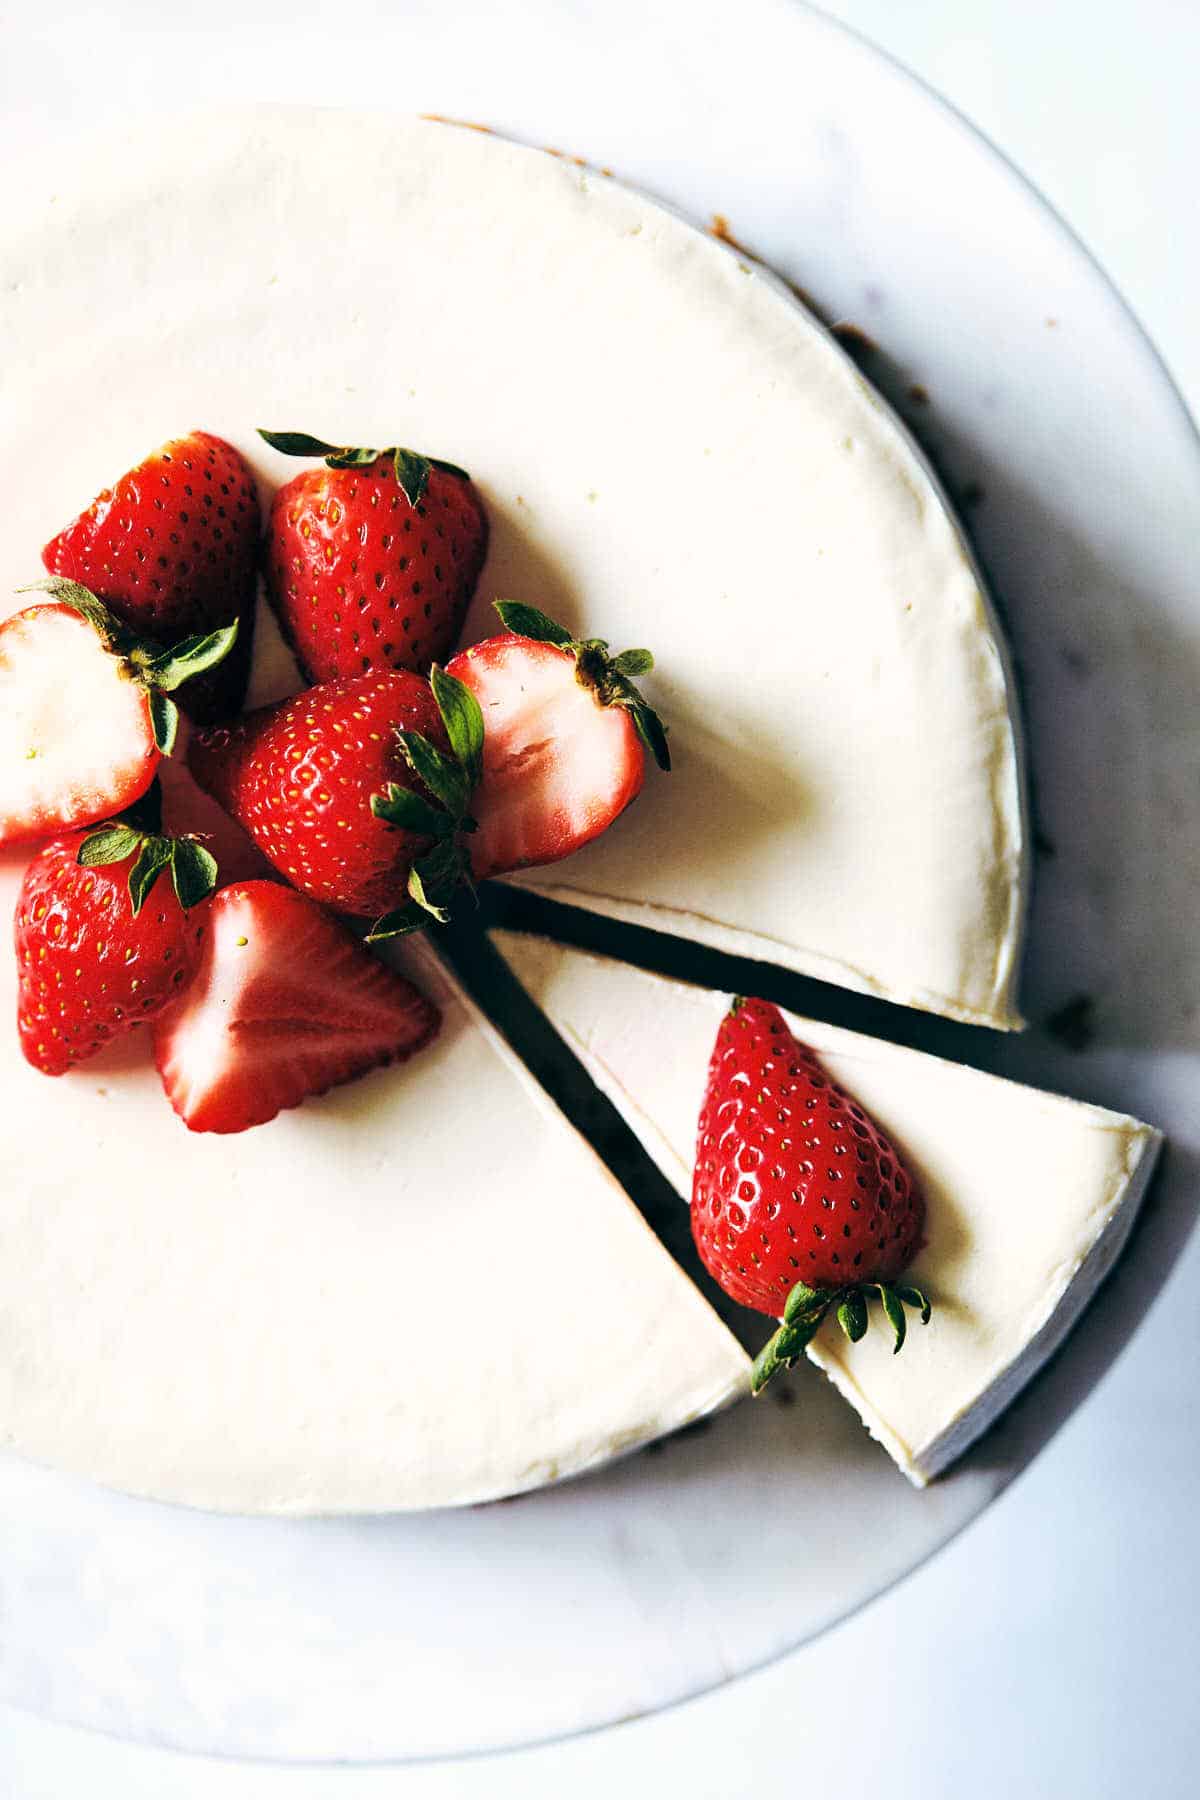 Cheesecake with rhubarb sauce topped with strawberries.